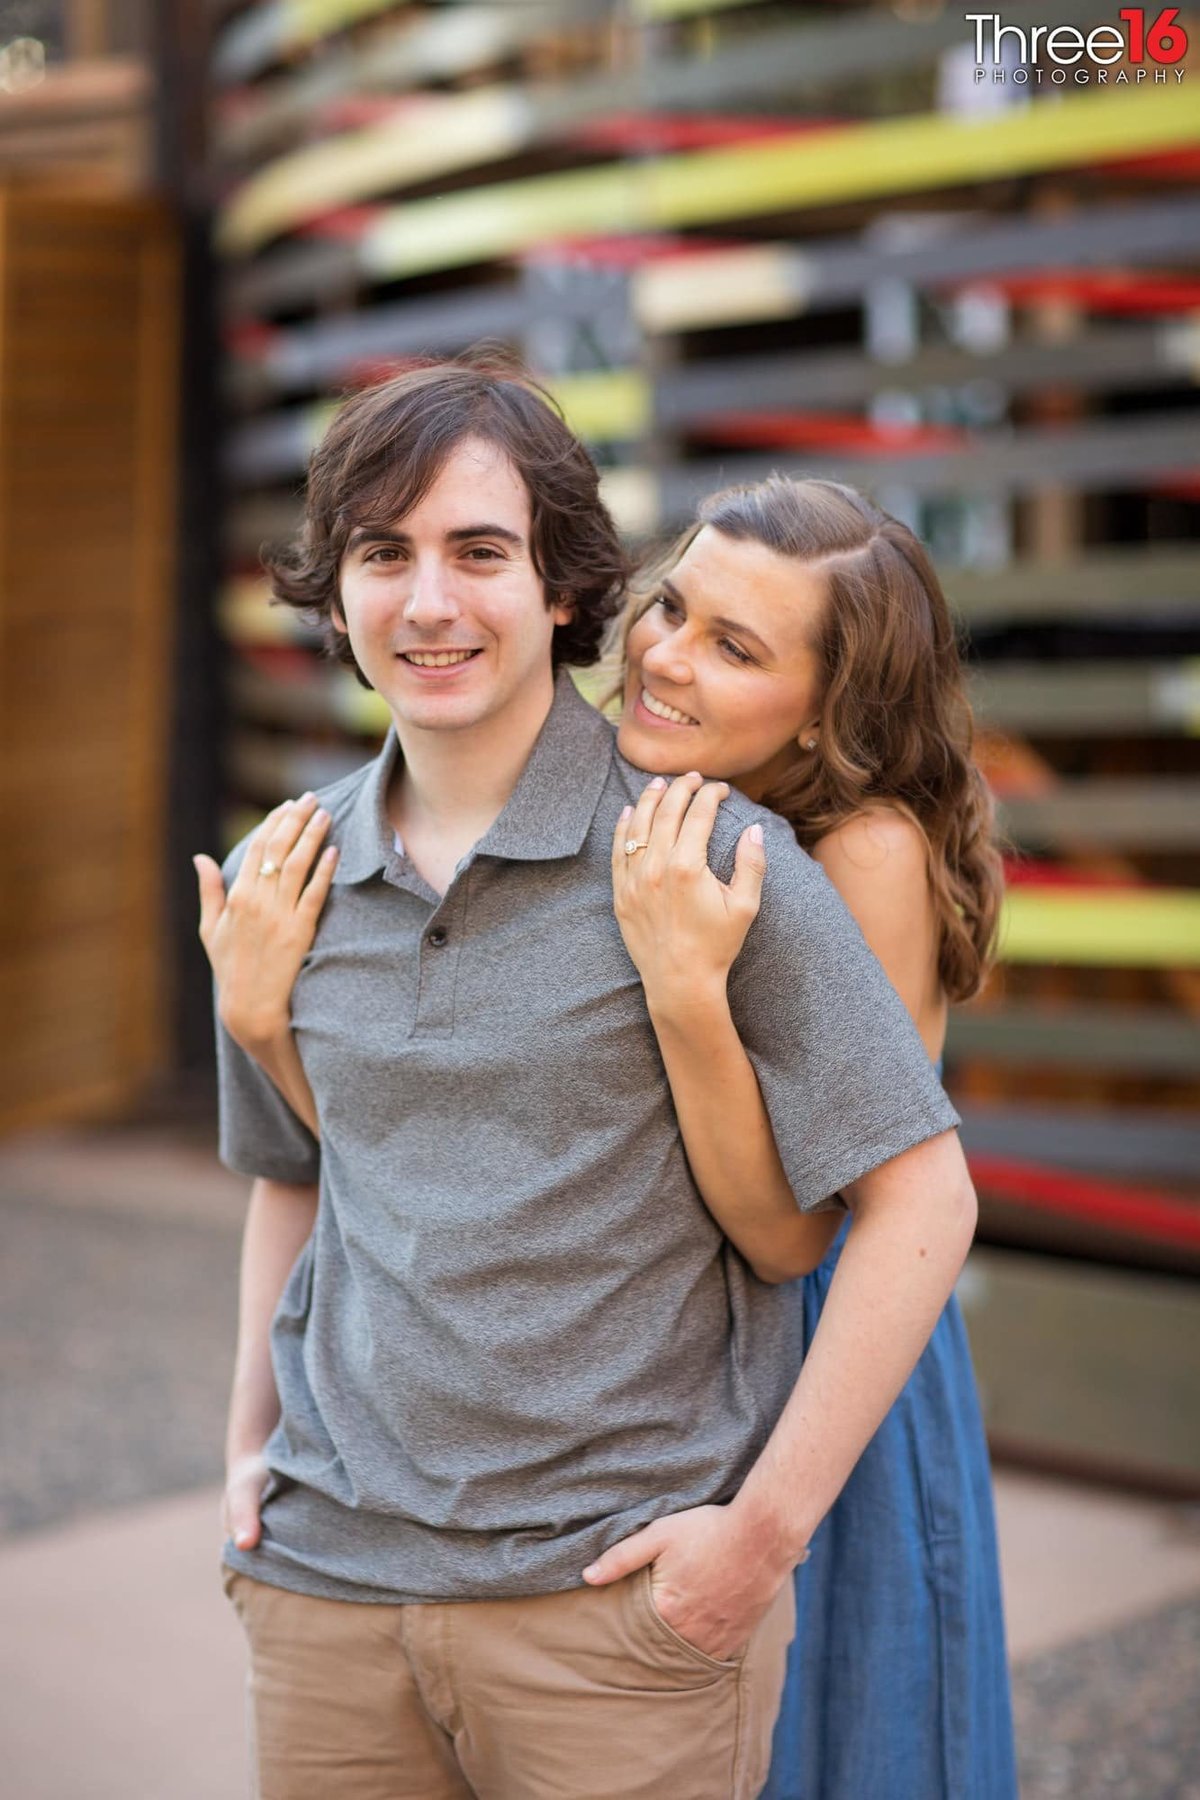 Bride to be holds on to her fiance from behind during photo session